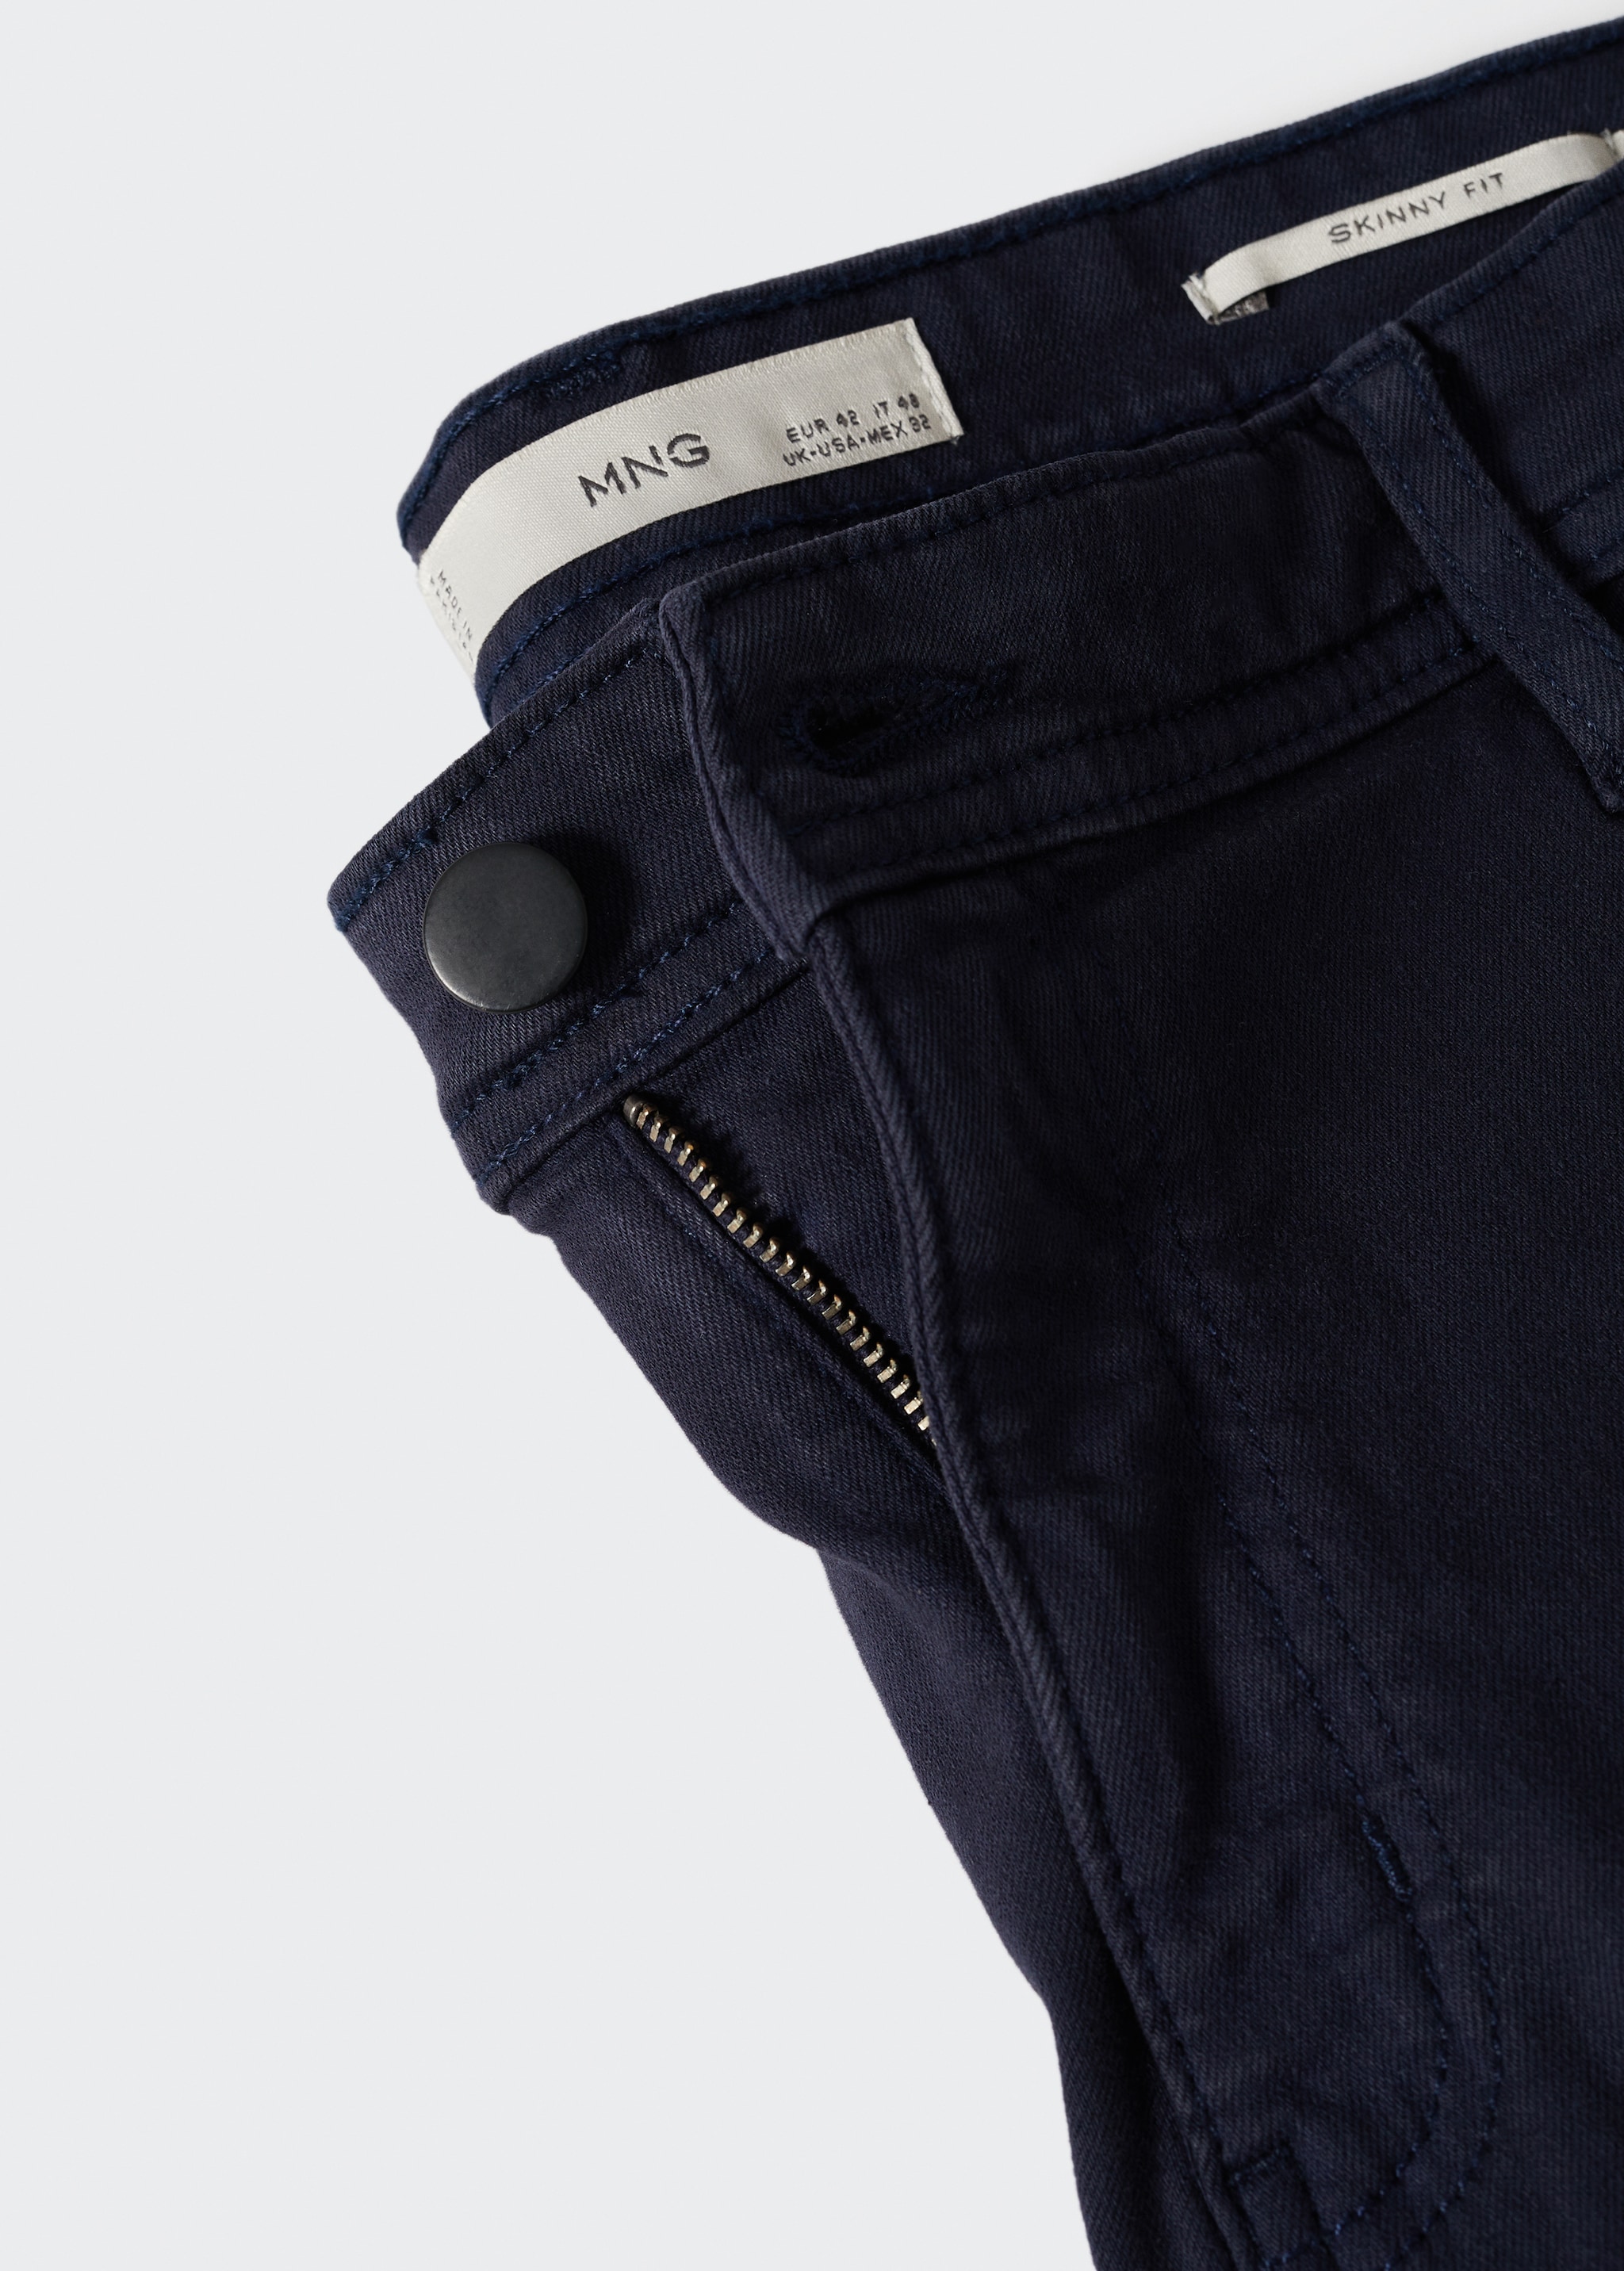 Colour skinny jeans - Details of the article 8